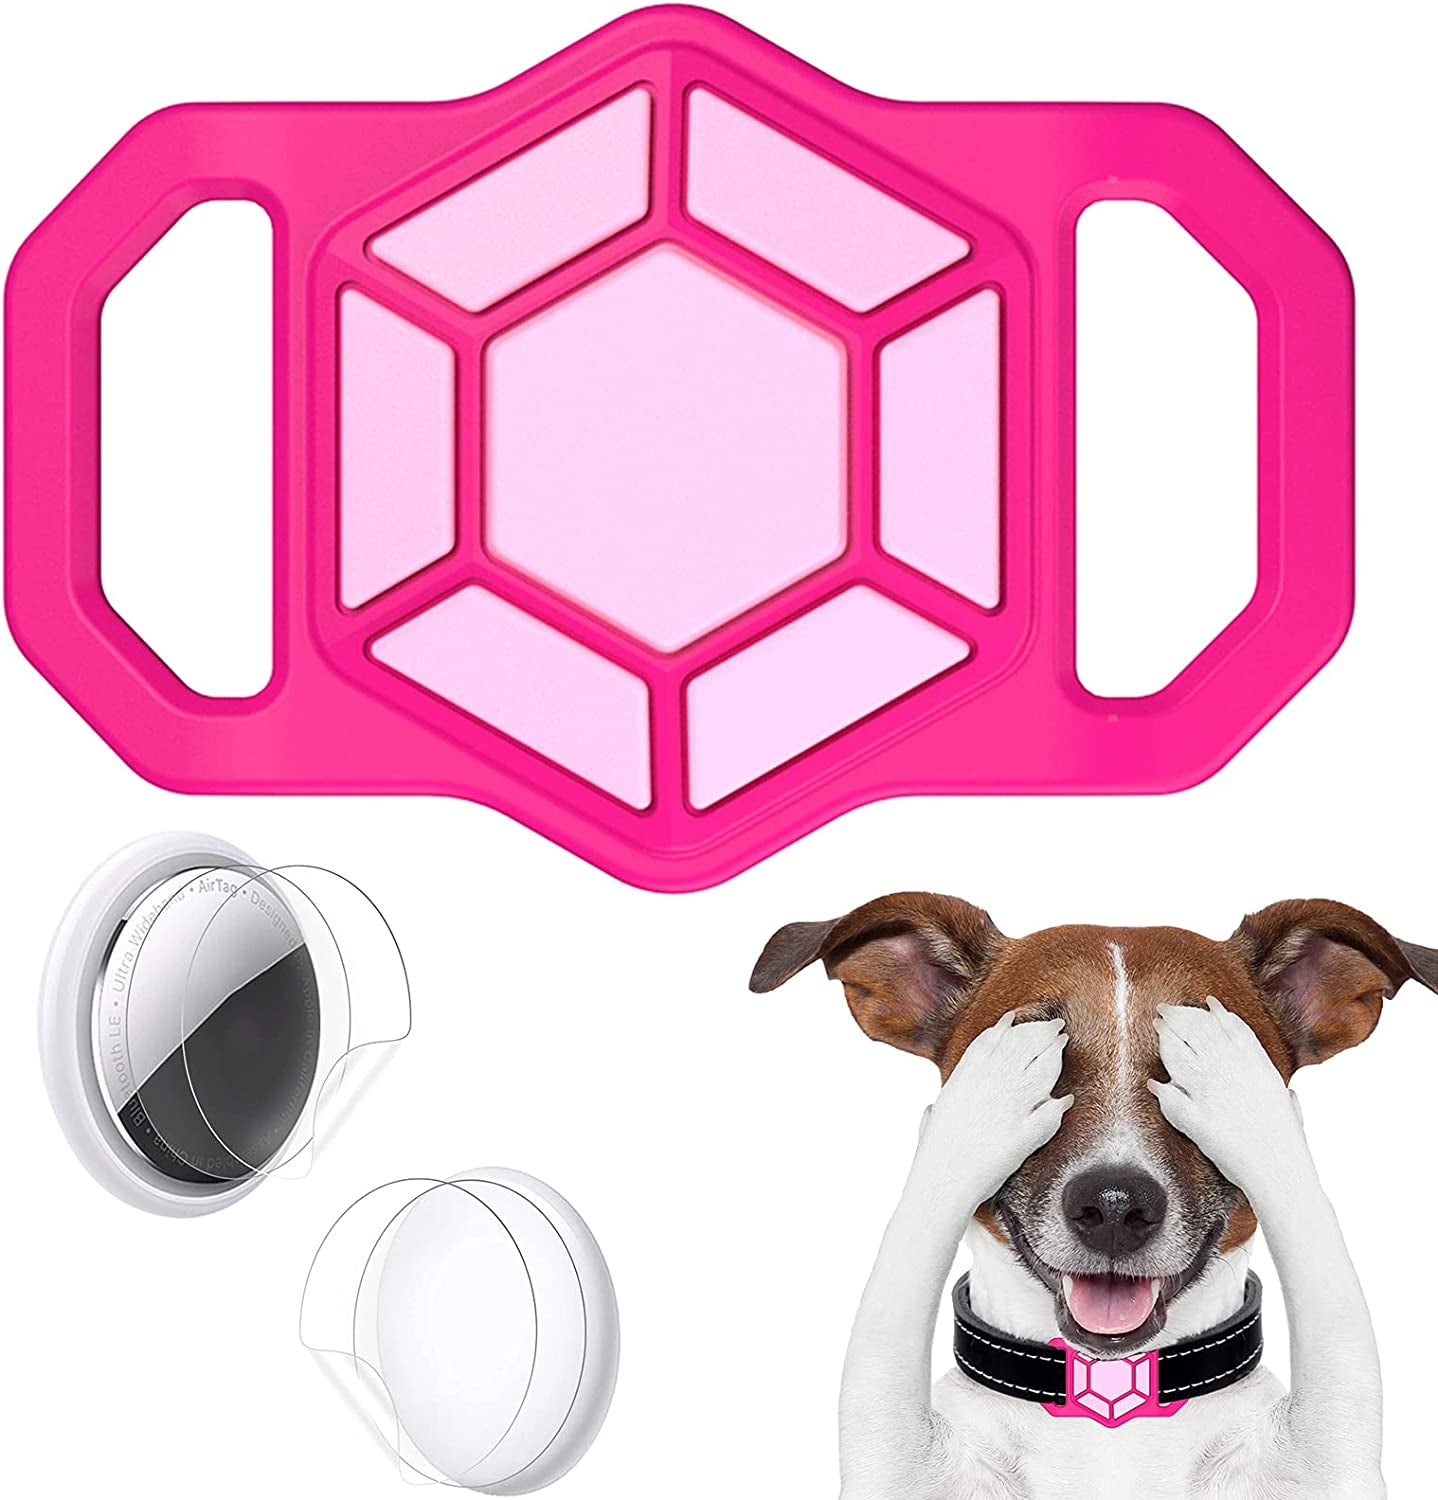 Protective Case Compatible for Apple Airtags for Dog Cat Collar Pet Loop Holder, Airtag Holder Accessories with Screen Protectors, Air Tag Silicone Cover for Pet Collar Electronics > GPS Accessories > GPS Cases Wustentre Rose Pink  